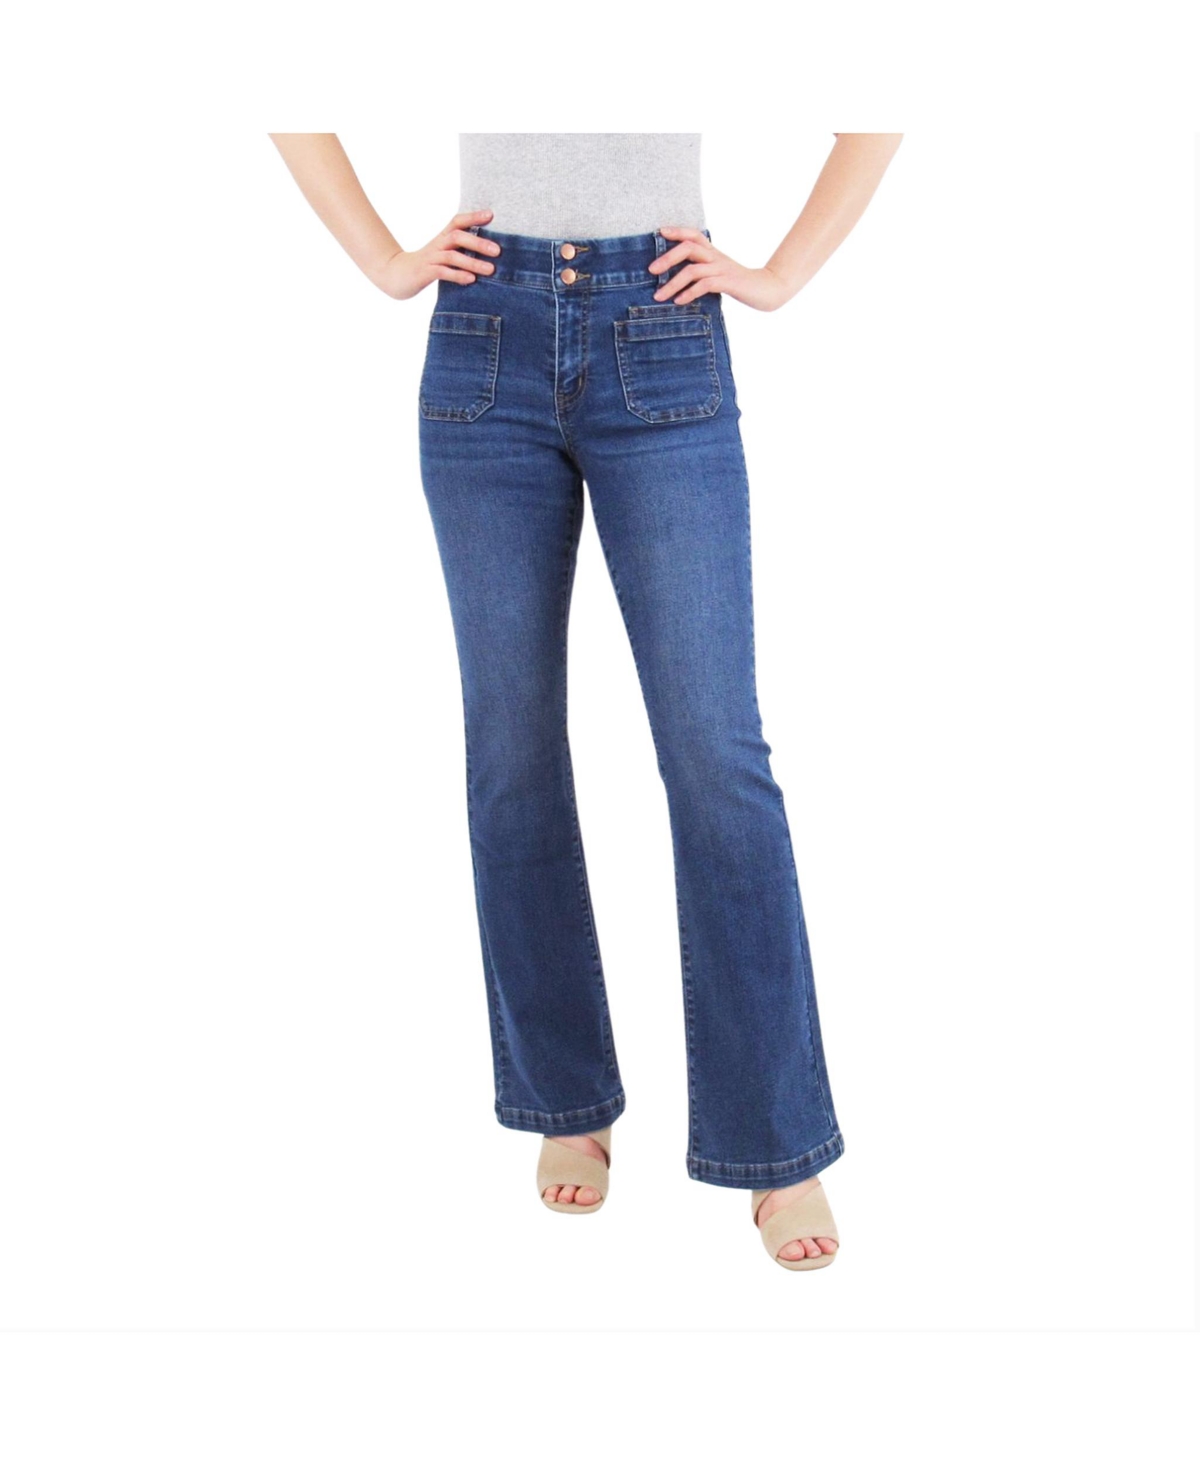 Women's Women Tummy Control Bootcut Jeans with Classic Pockets and back design - Medium wash